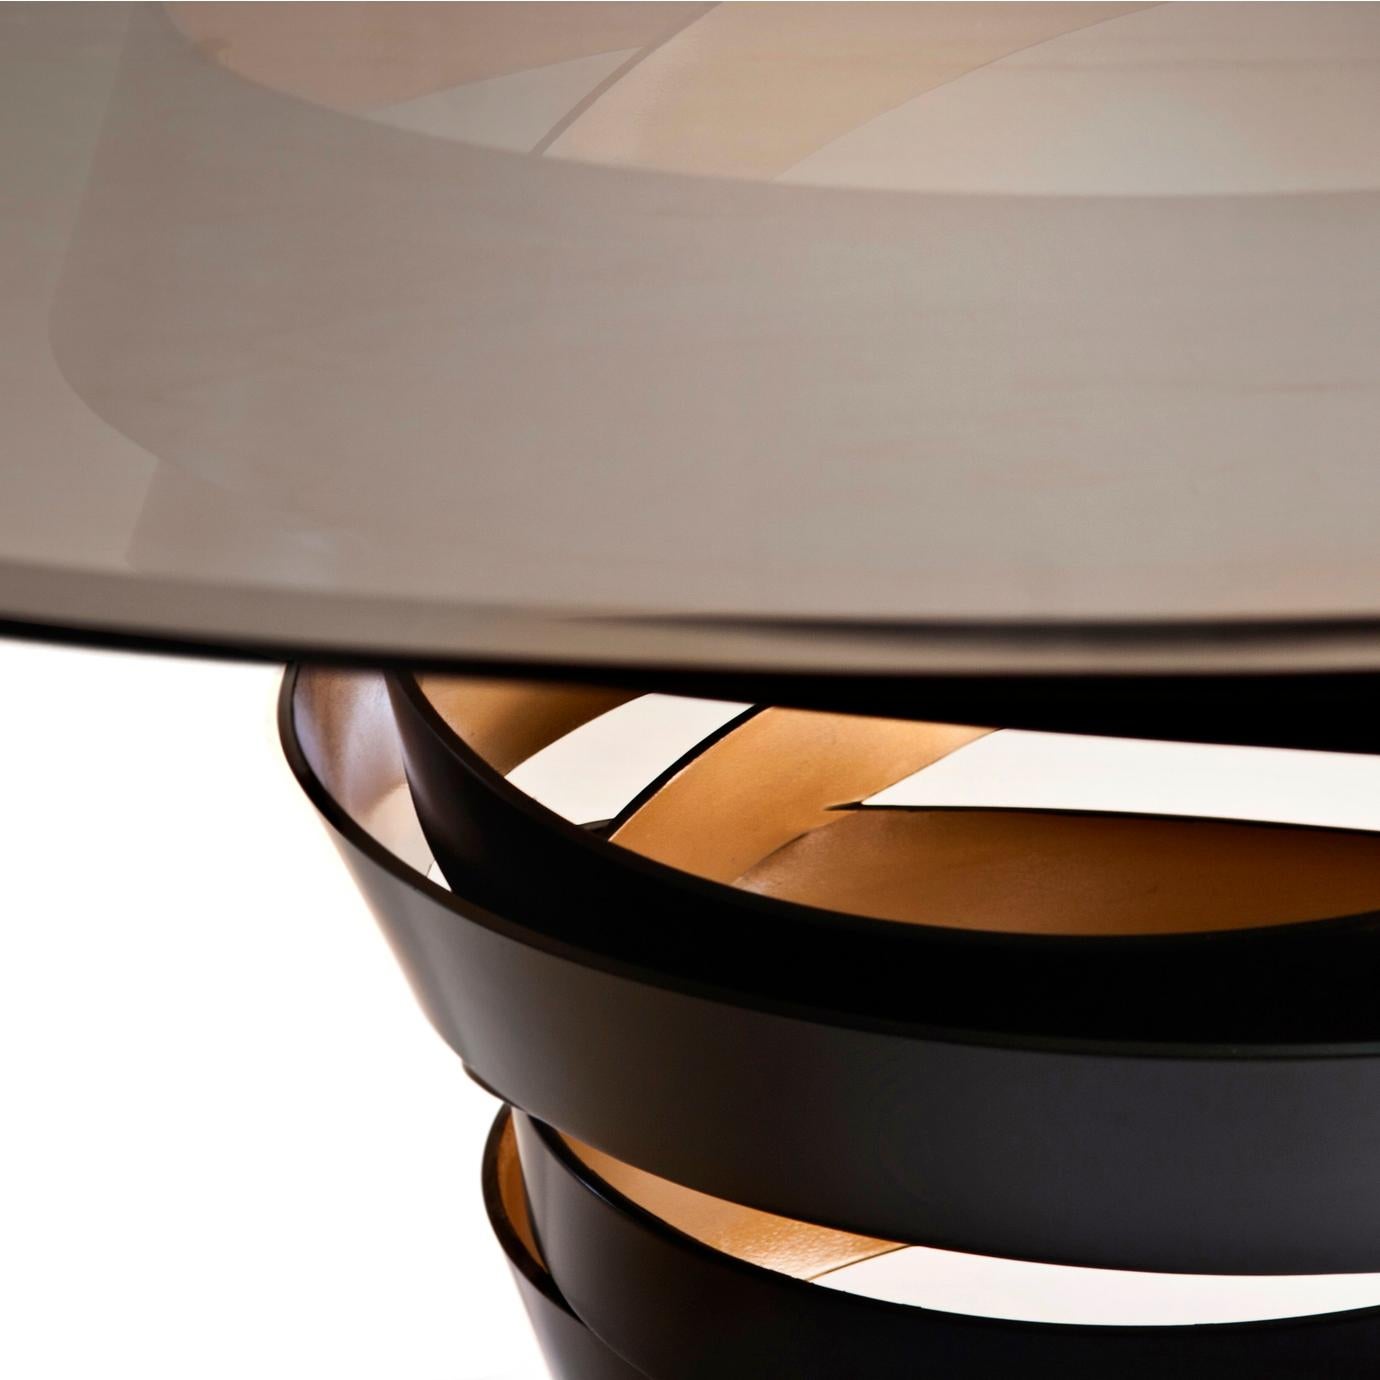 The swirling metal ribbon of the Intuition dining table evokes the mysterious and divine feminine instinct. Carefree and unexpected swirls are guided by emotions and desires. The two-tone metal base is topped with a perfect glass circle top. Without